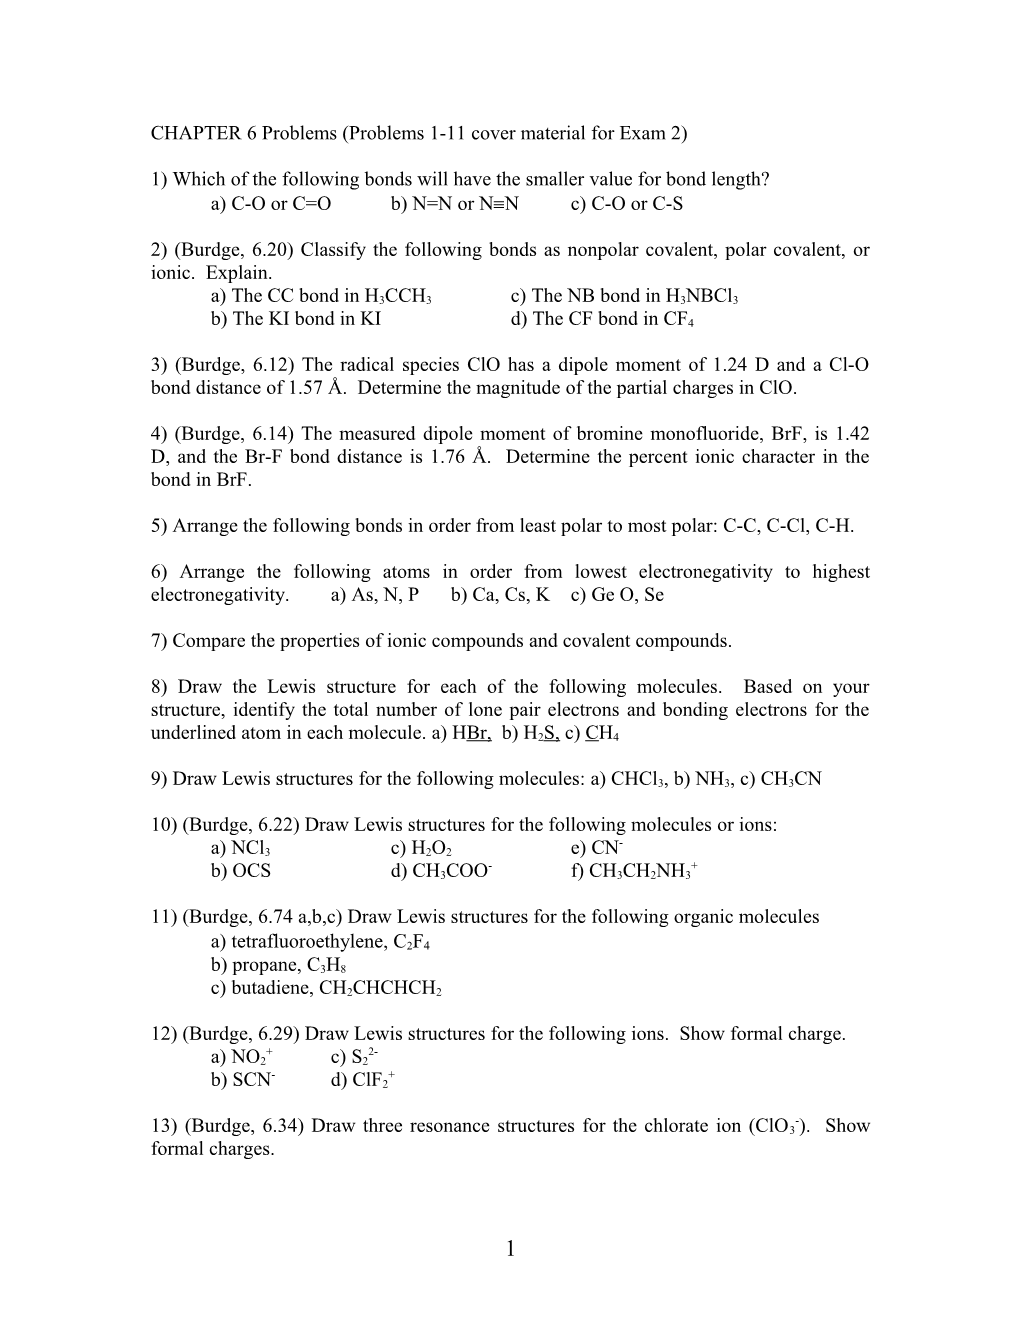 CHAPTER 6 Problems (Problems 1-11 Cover Material for Exam 2)